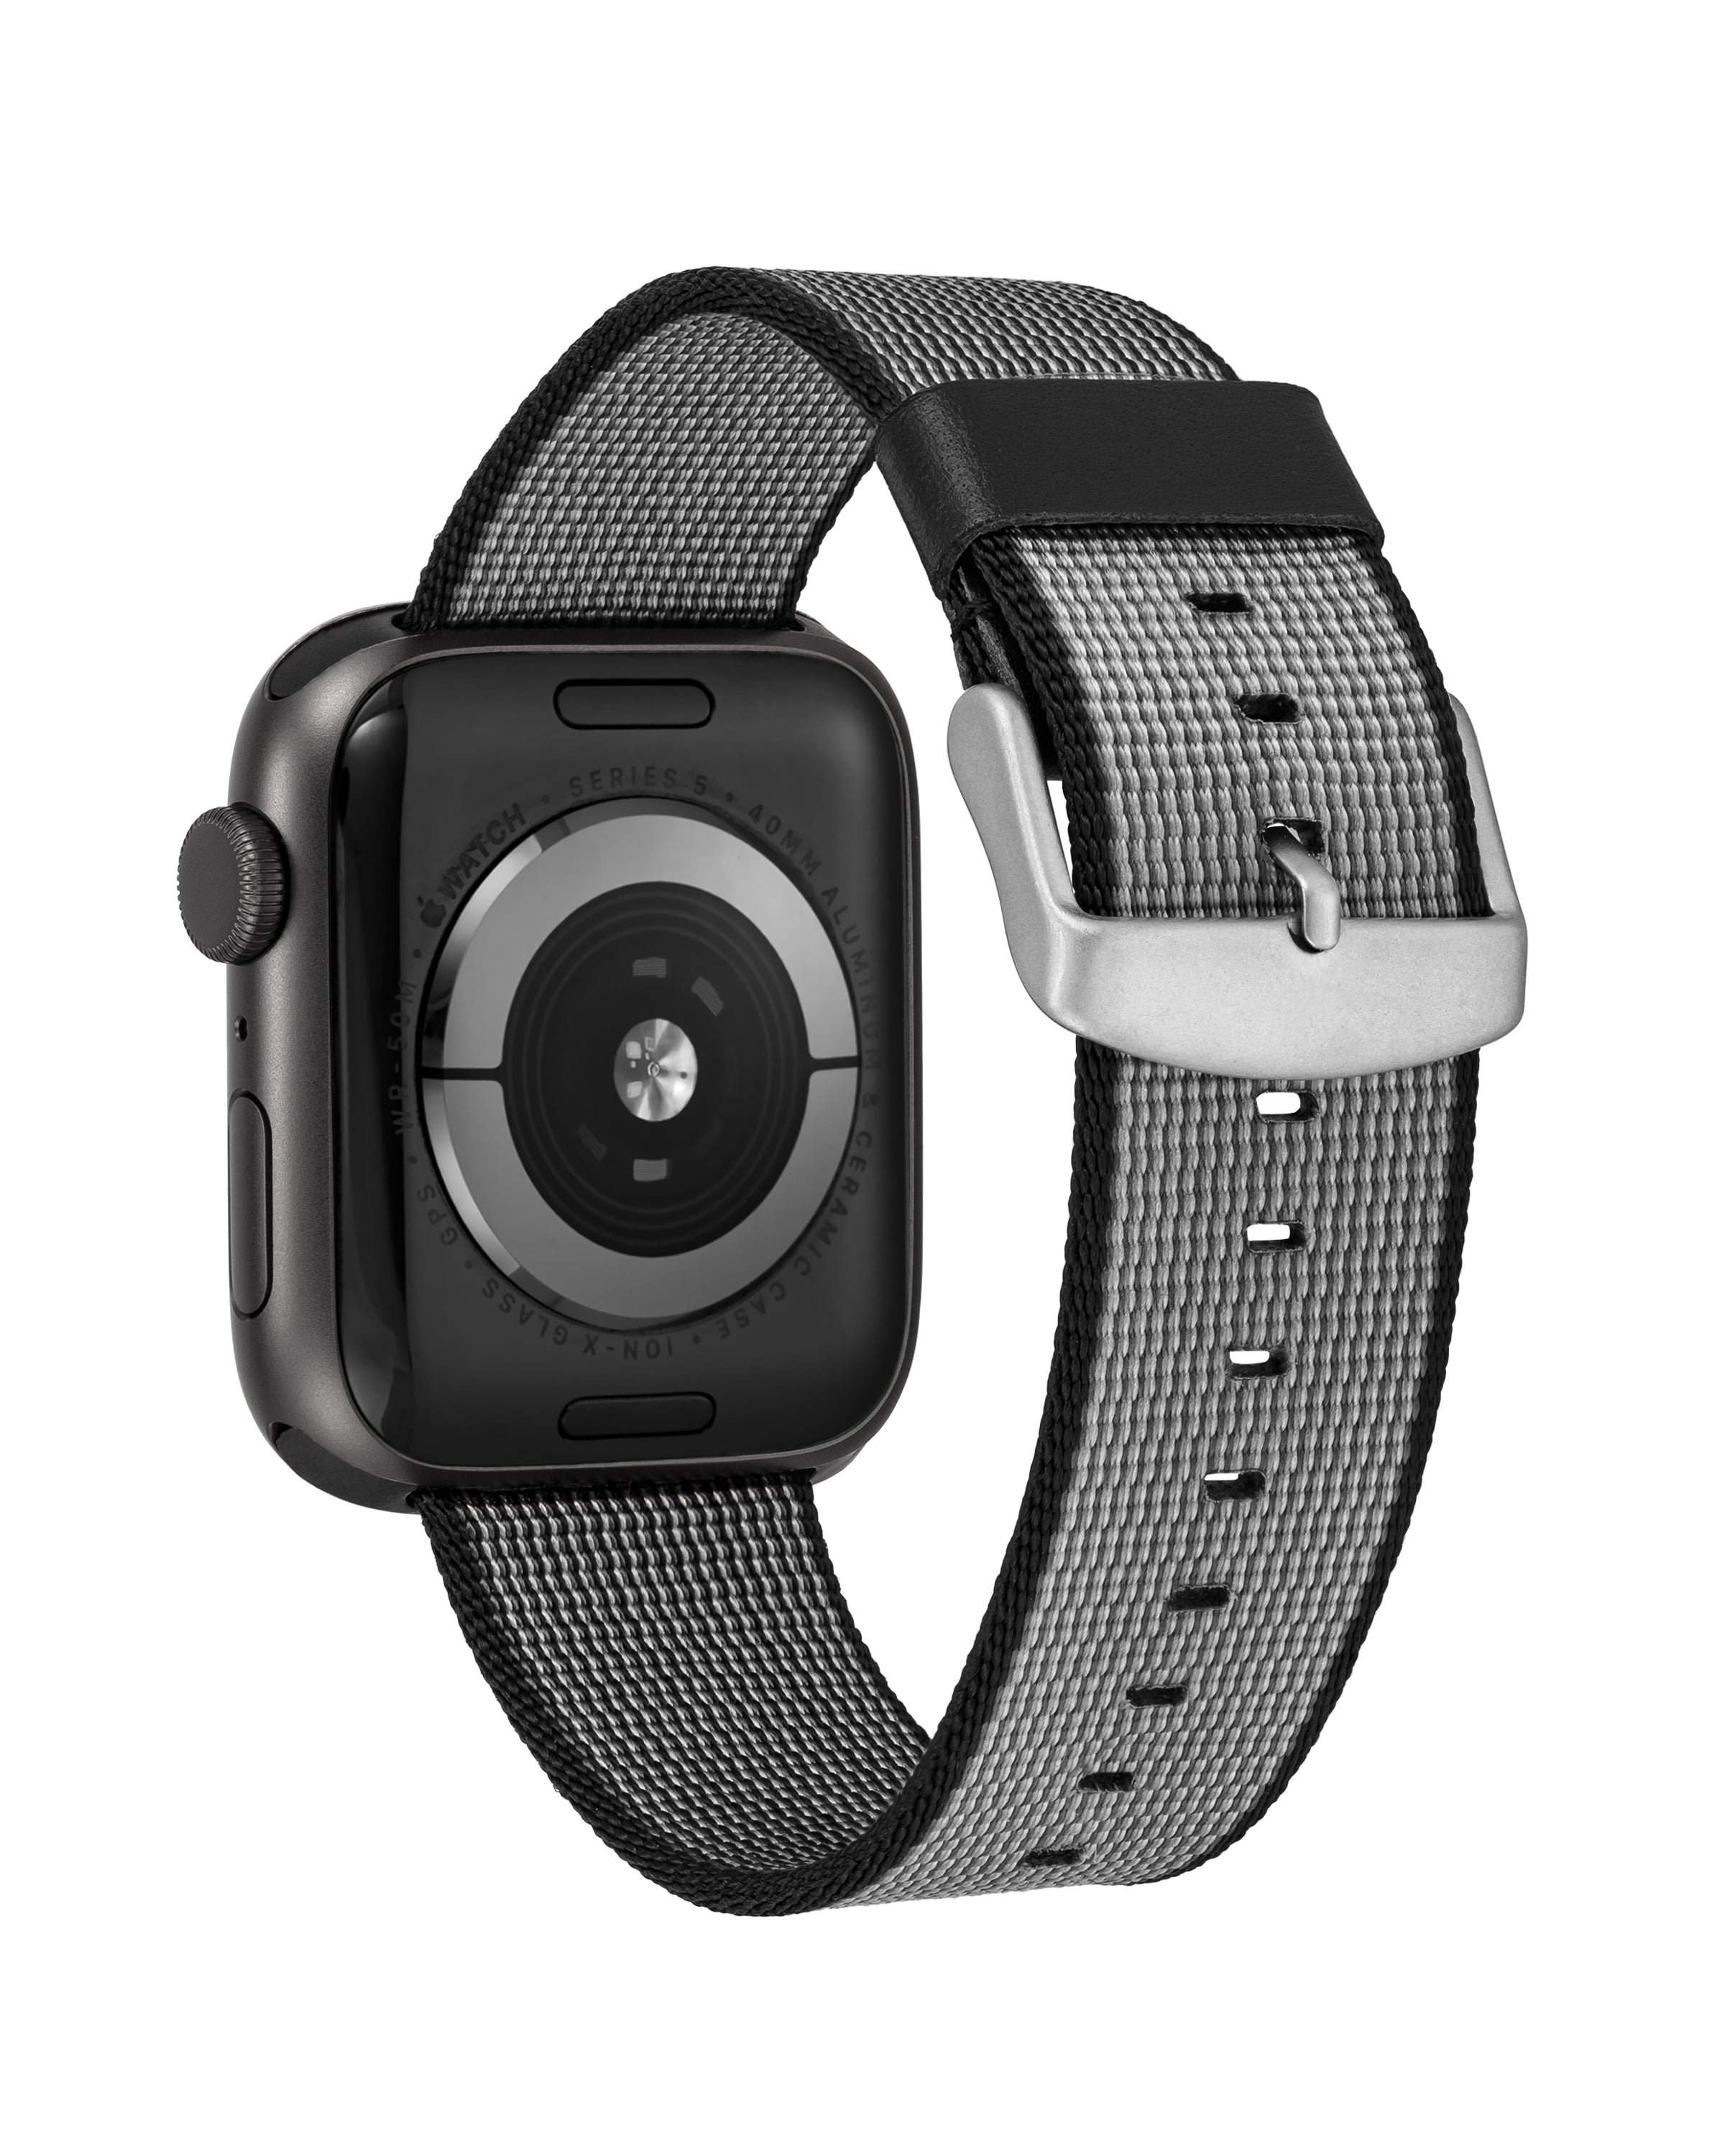 WITHit Apple Watch Multi Link Band - Black